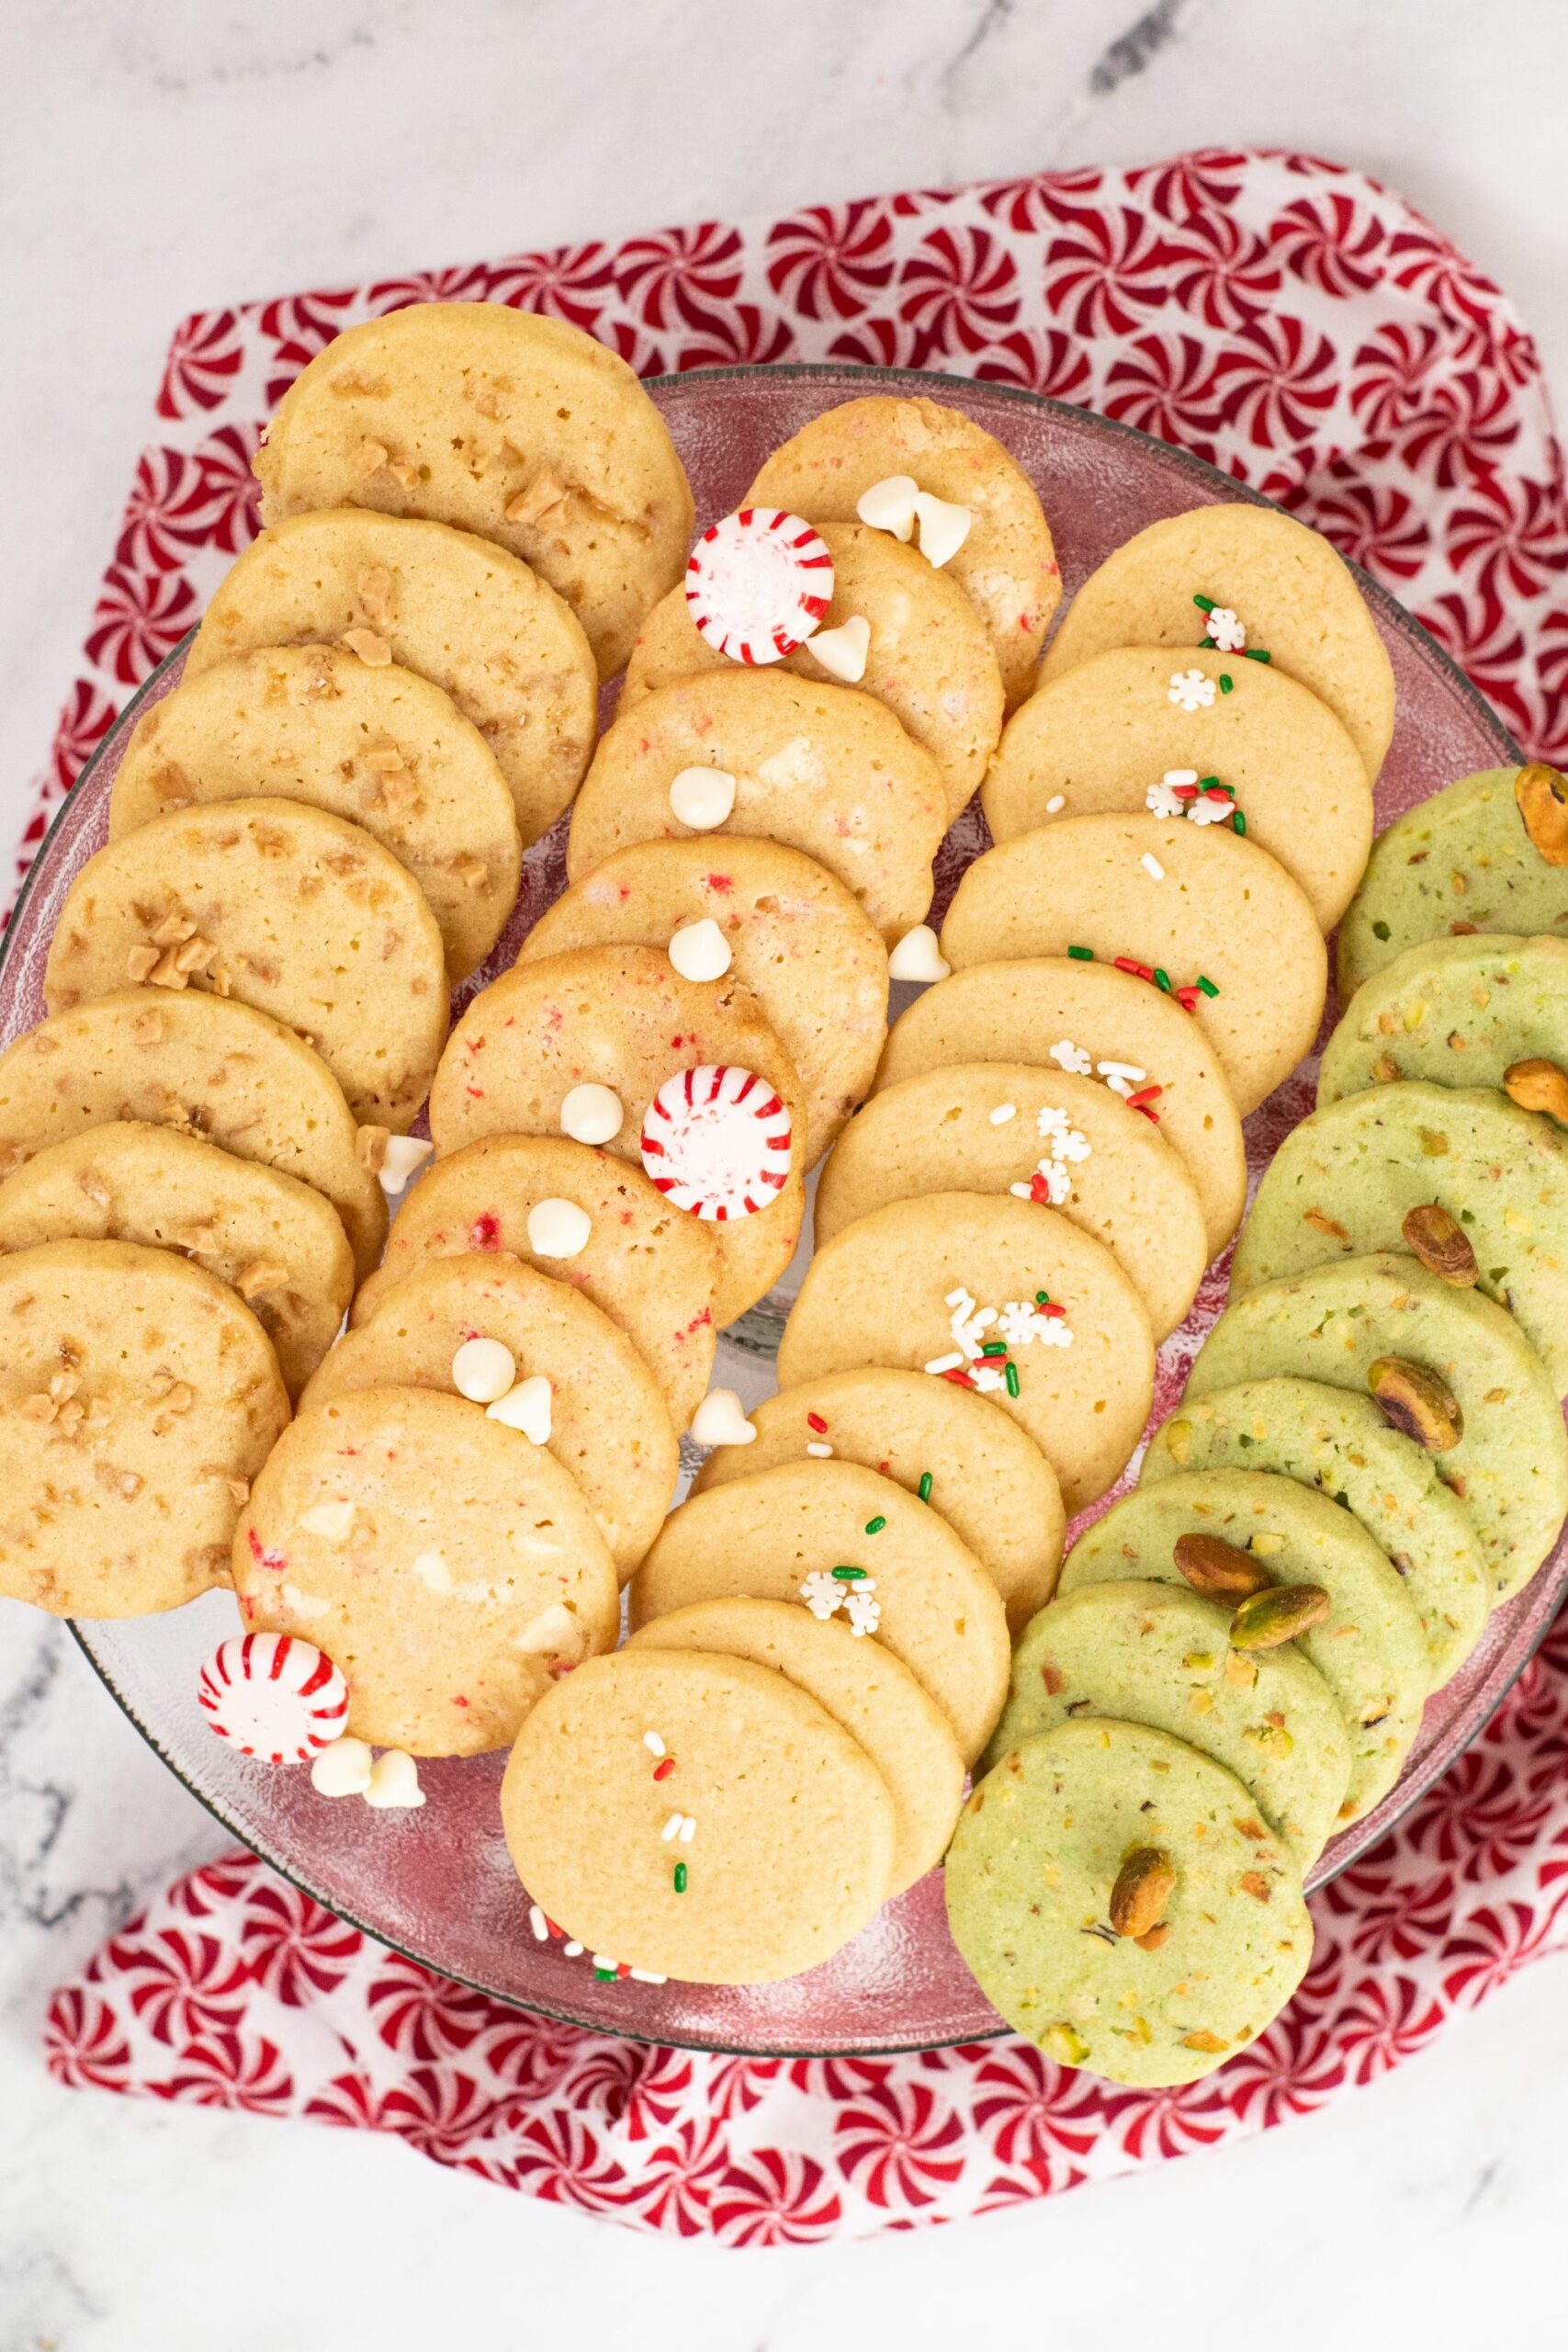 A platter of all the cookies you can make with the one dough.